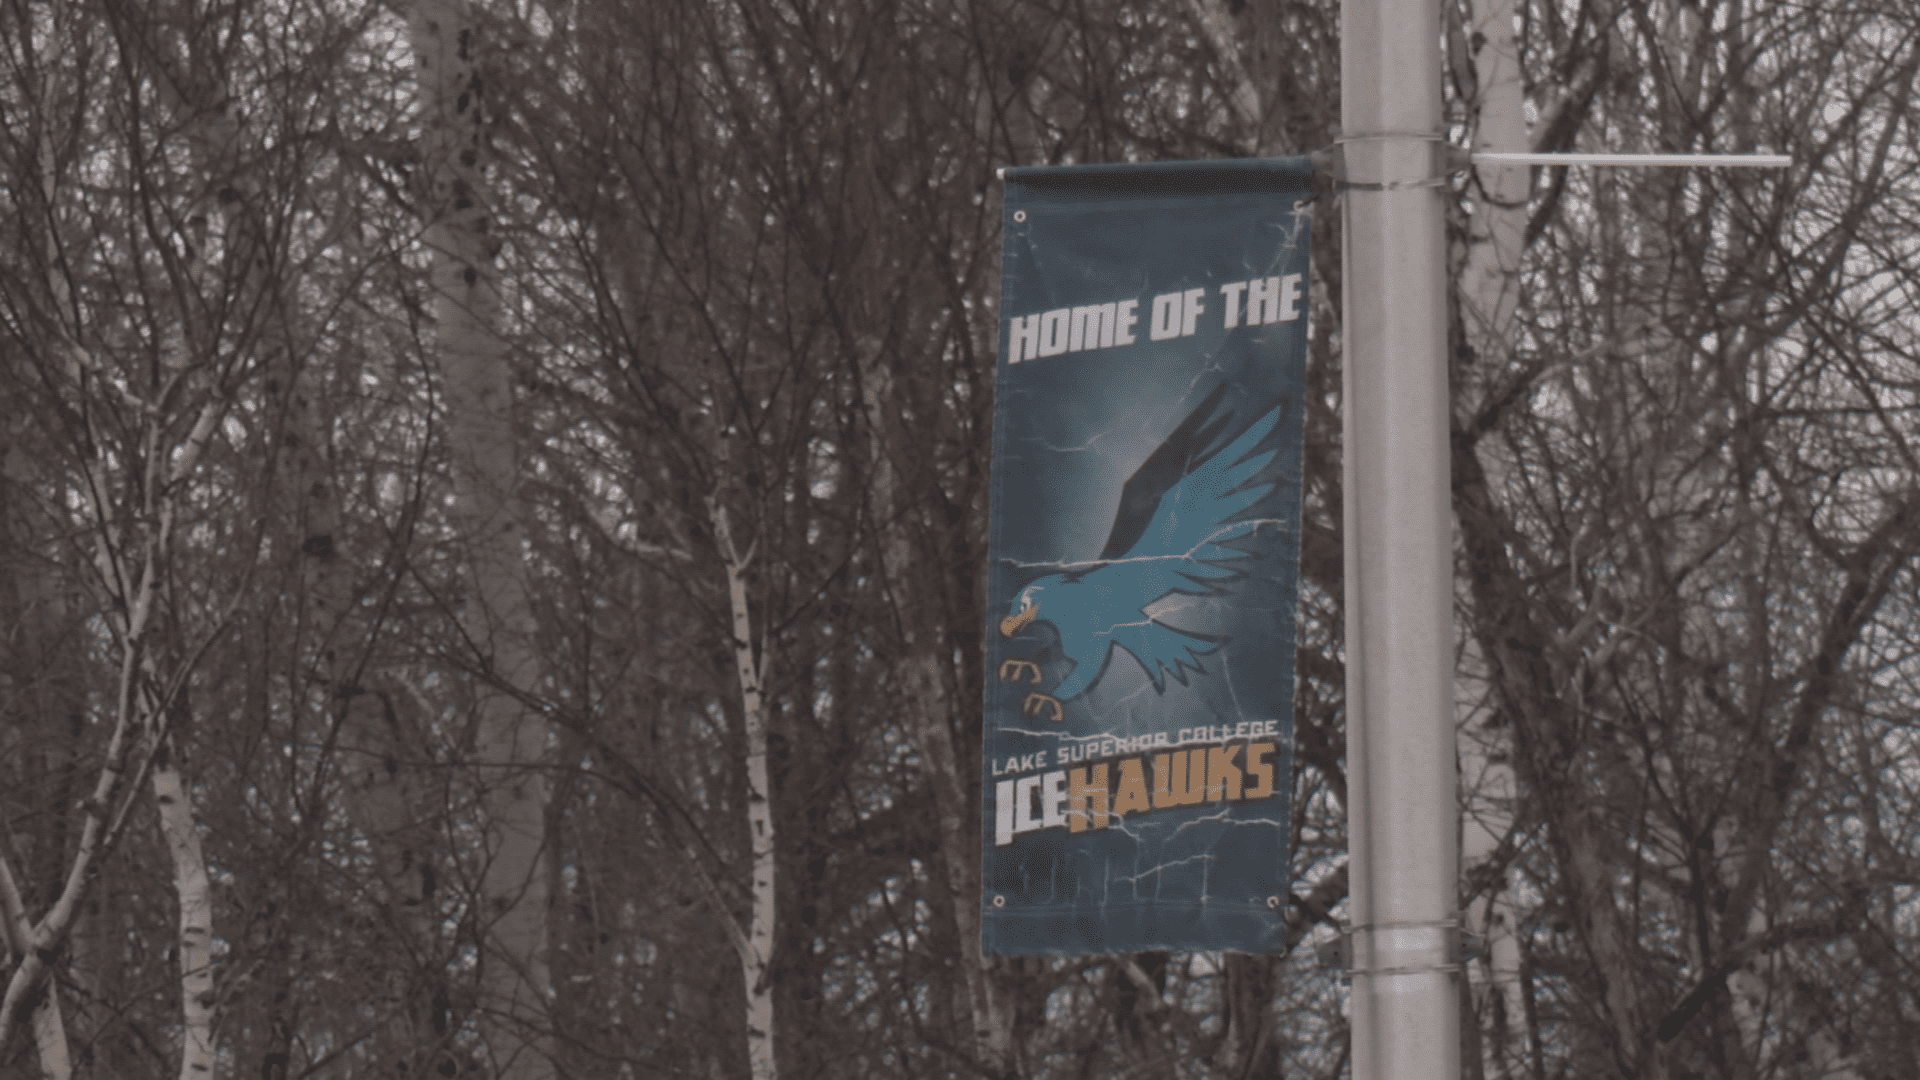 Lake Superior College, "Home of the Ice Hawks" light pole banner.